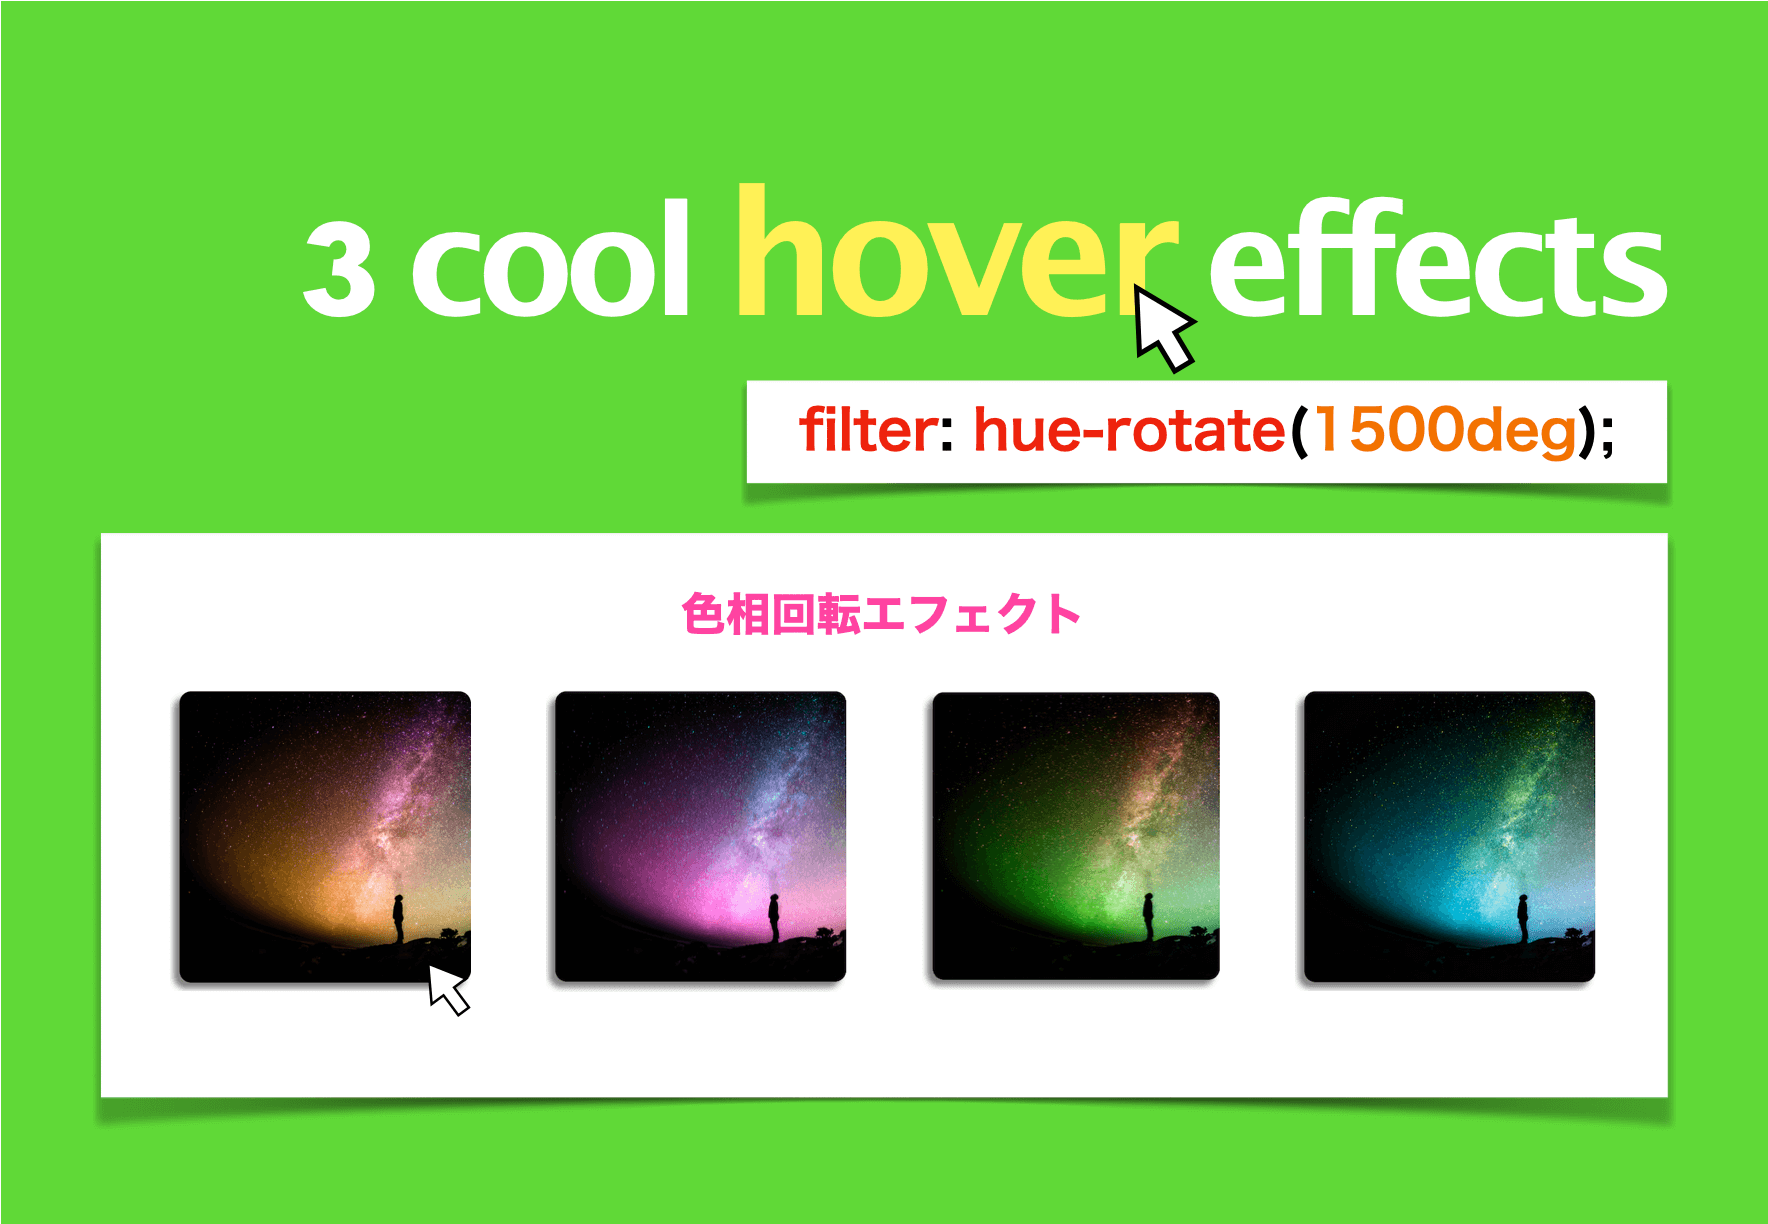 css-effects-hover-filter-hue-rotate.png